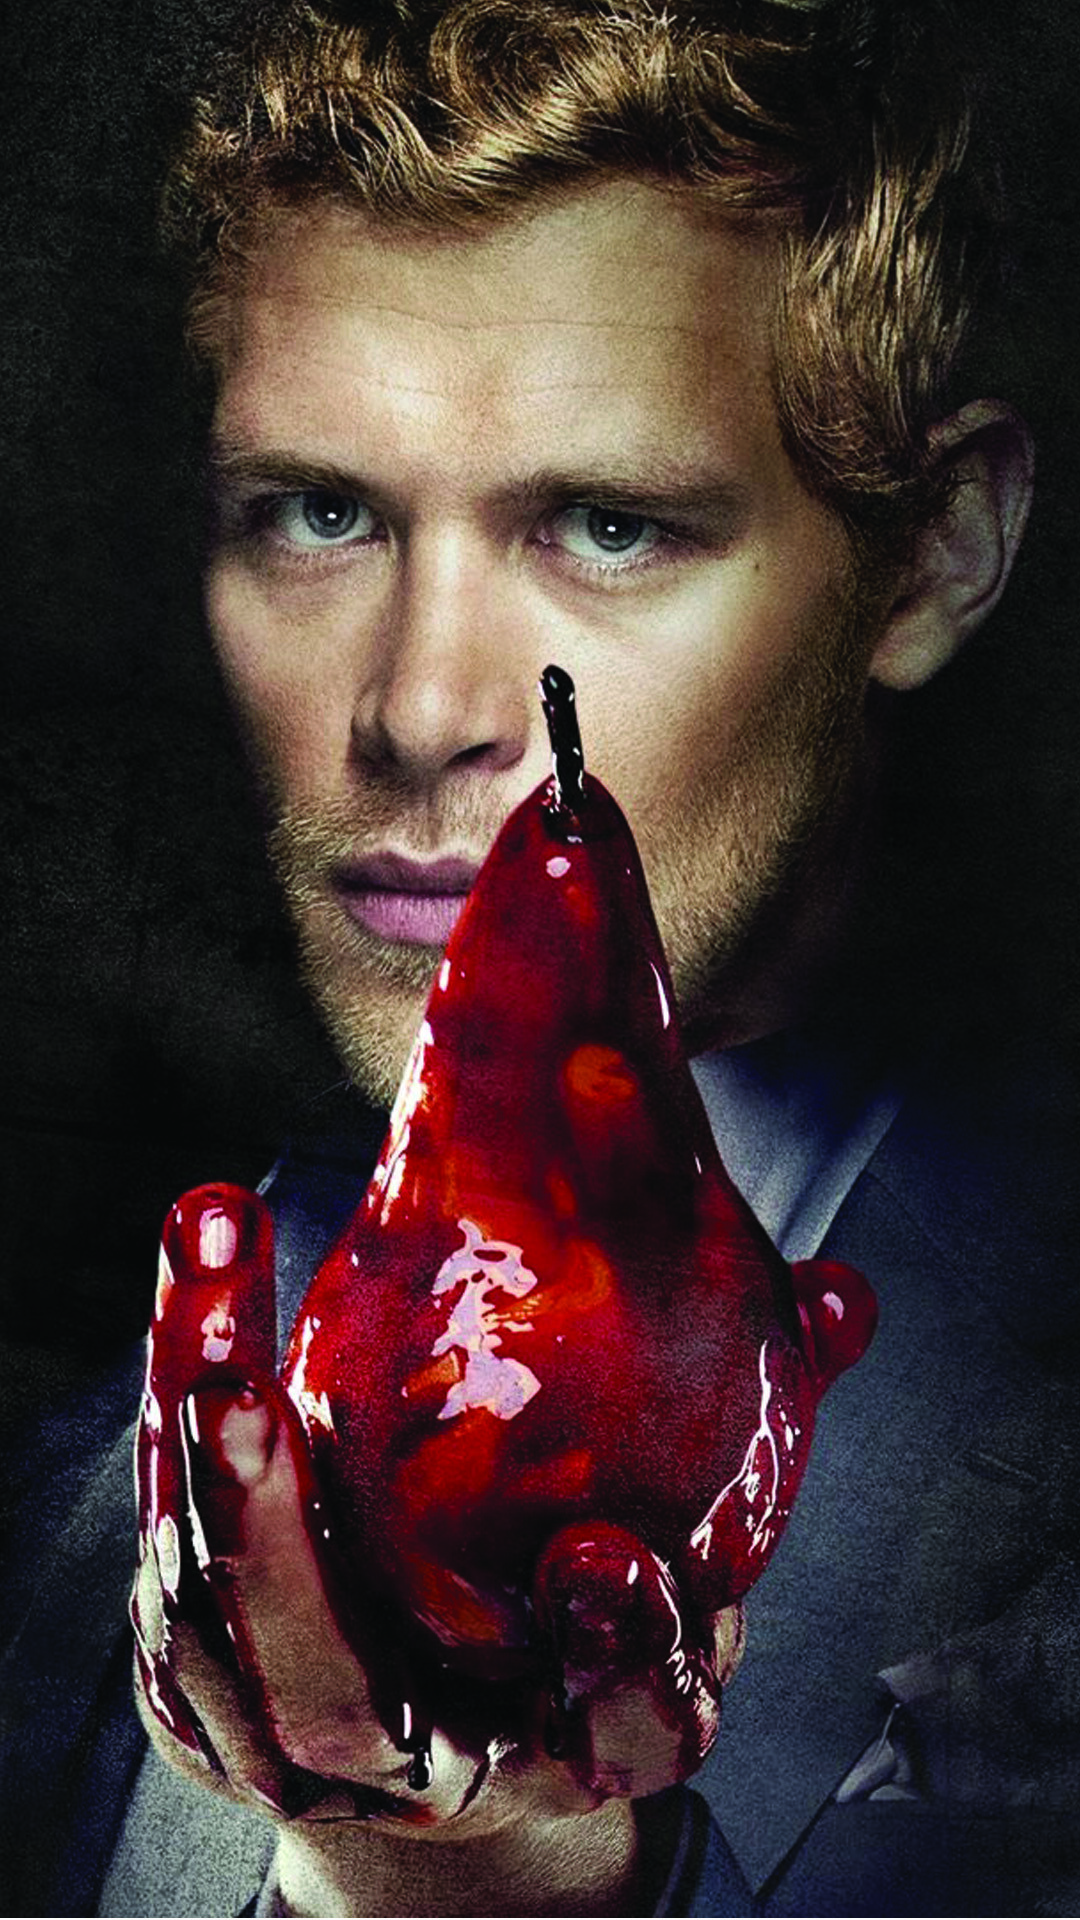 The Originals (TV Series): Klaus Mikaelson, Hybrid, The son of a witch and a werewolf being a vampire by magic. 1080x1920 Full HD Wallpaper.